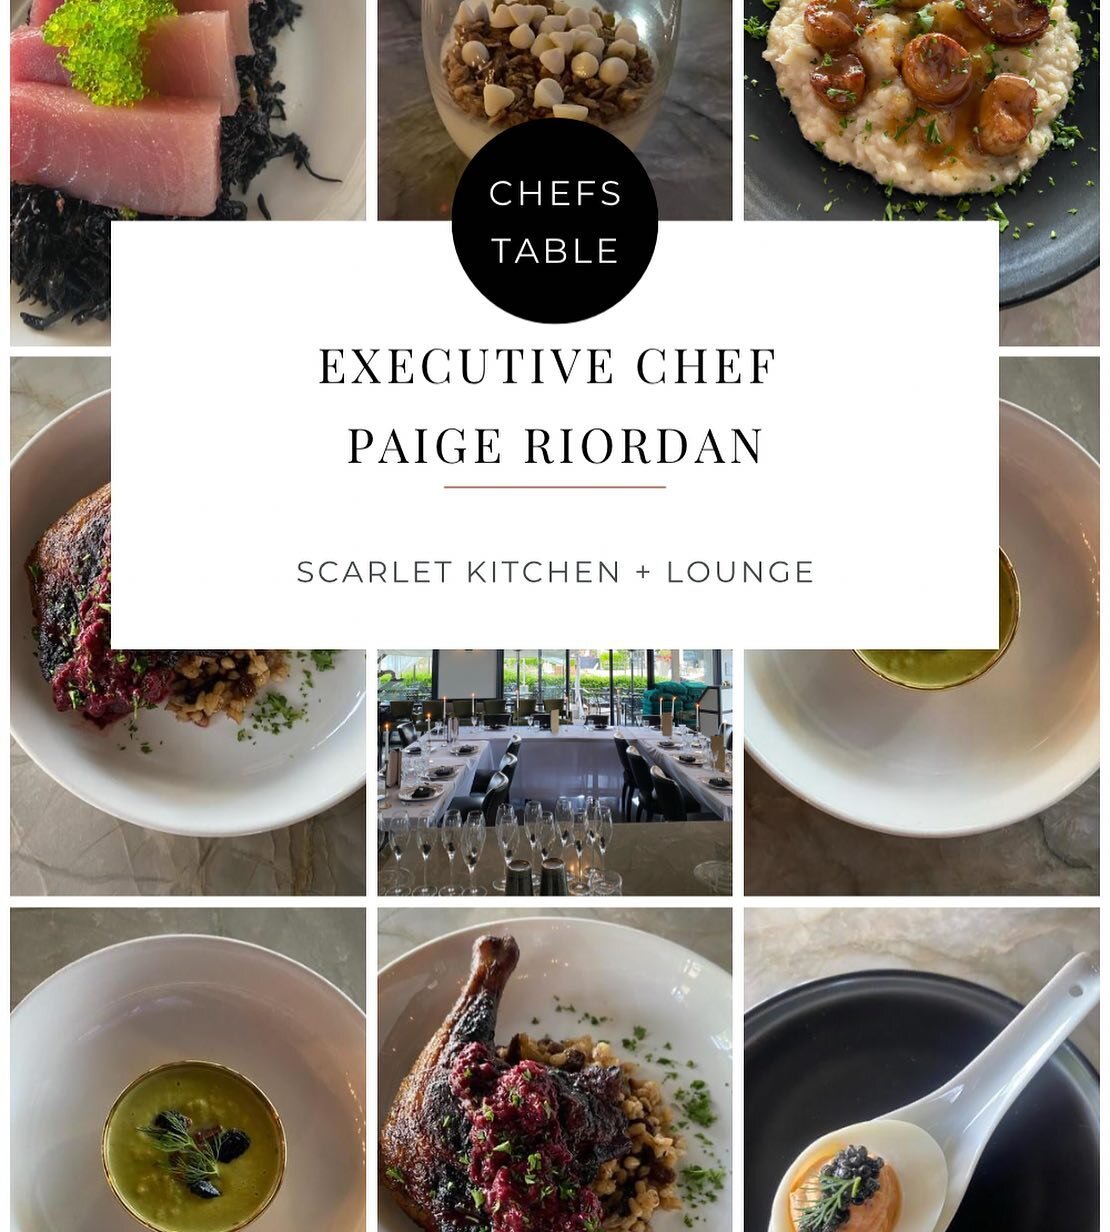 Indulge in an elevated dining experience like no other @scarletkitchenandlounge Chef's Table! 🍽️

With a focus on quality ingredients and simplicity, Chef Paige Riordan crafts a unique 7-course menu for each exclusive event. 🌟 Enjoy the luxury serv